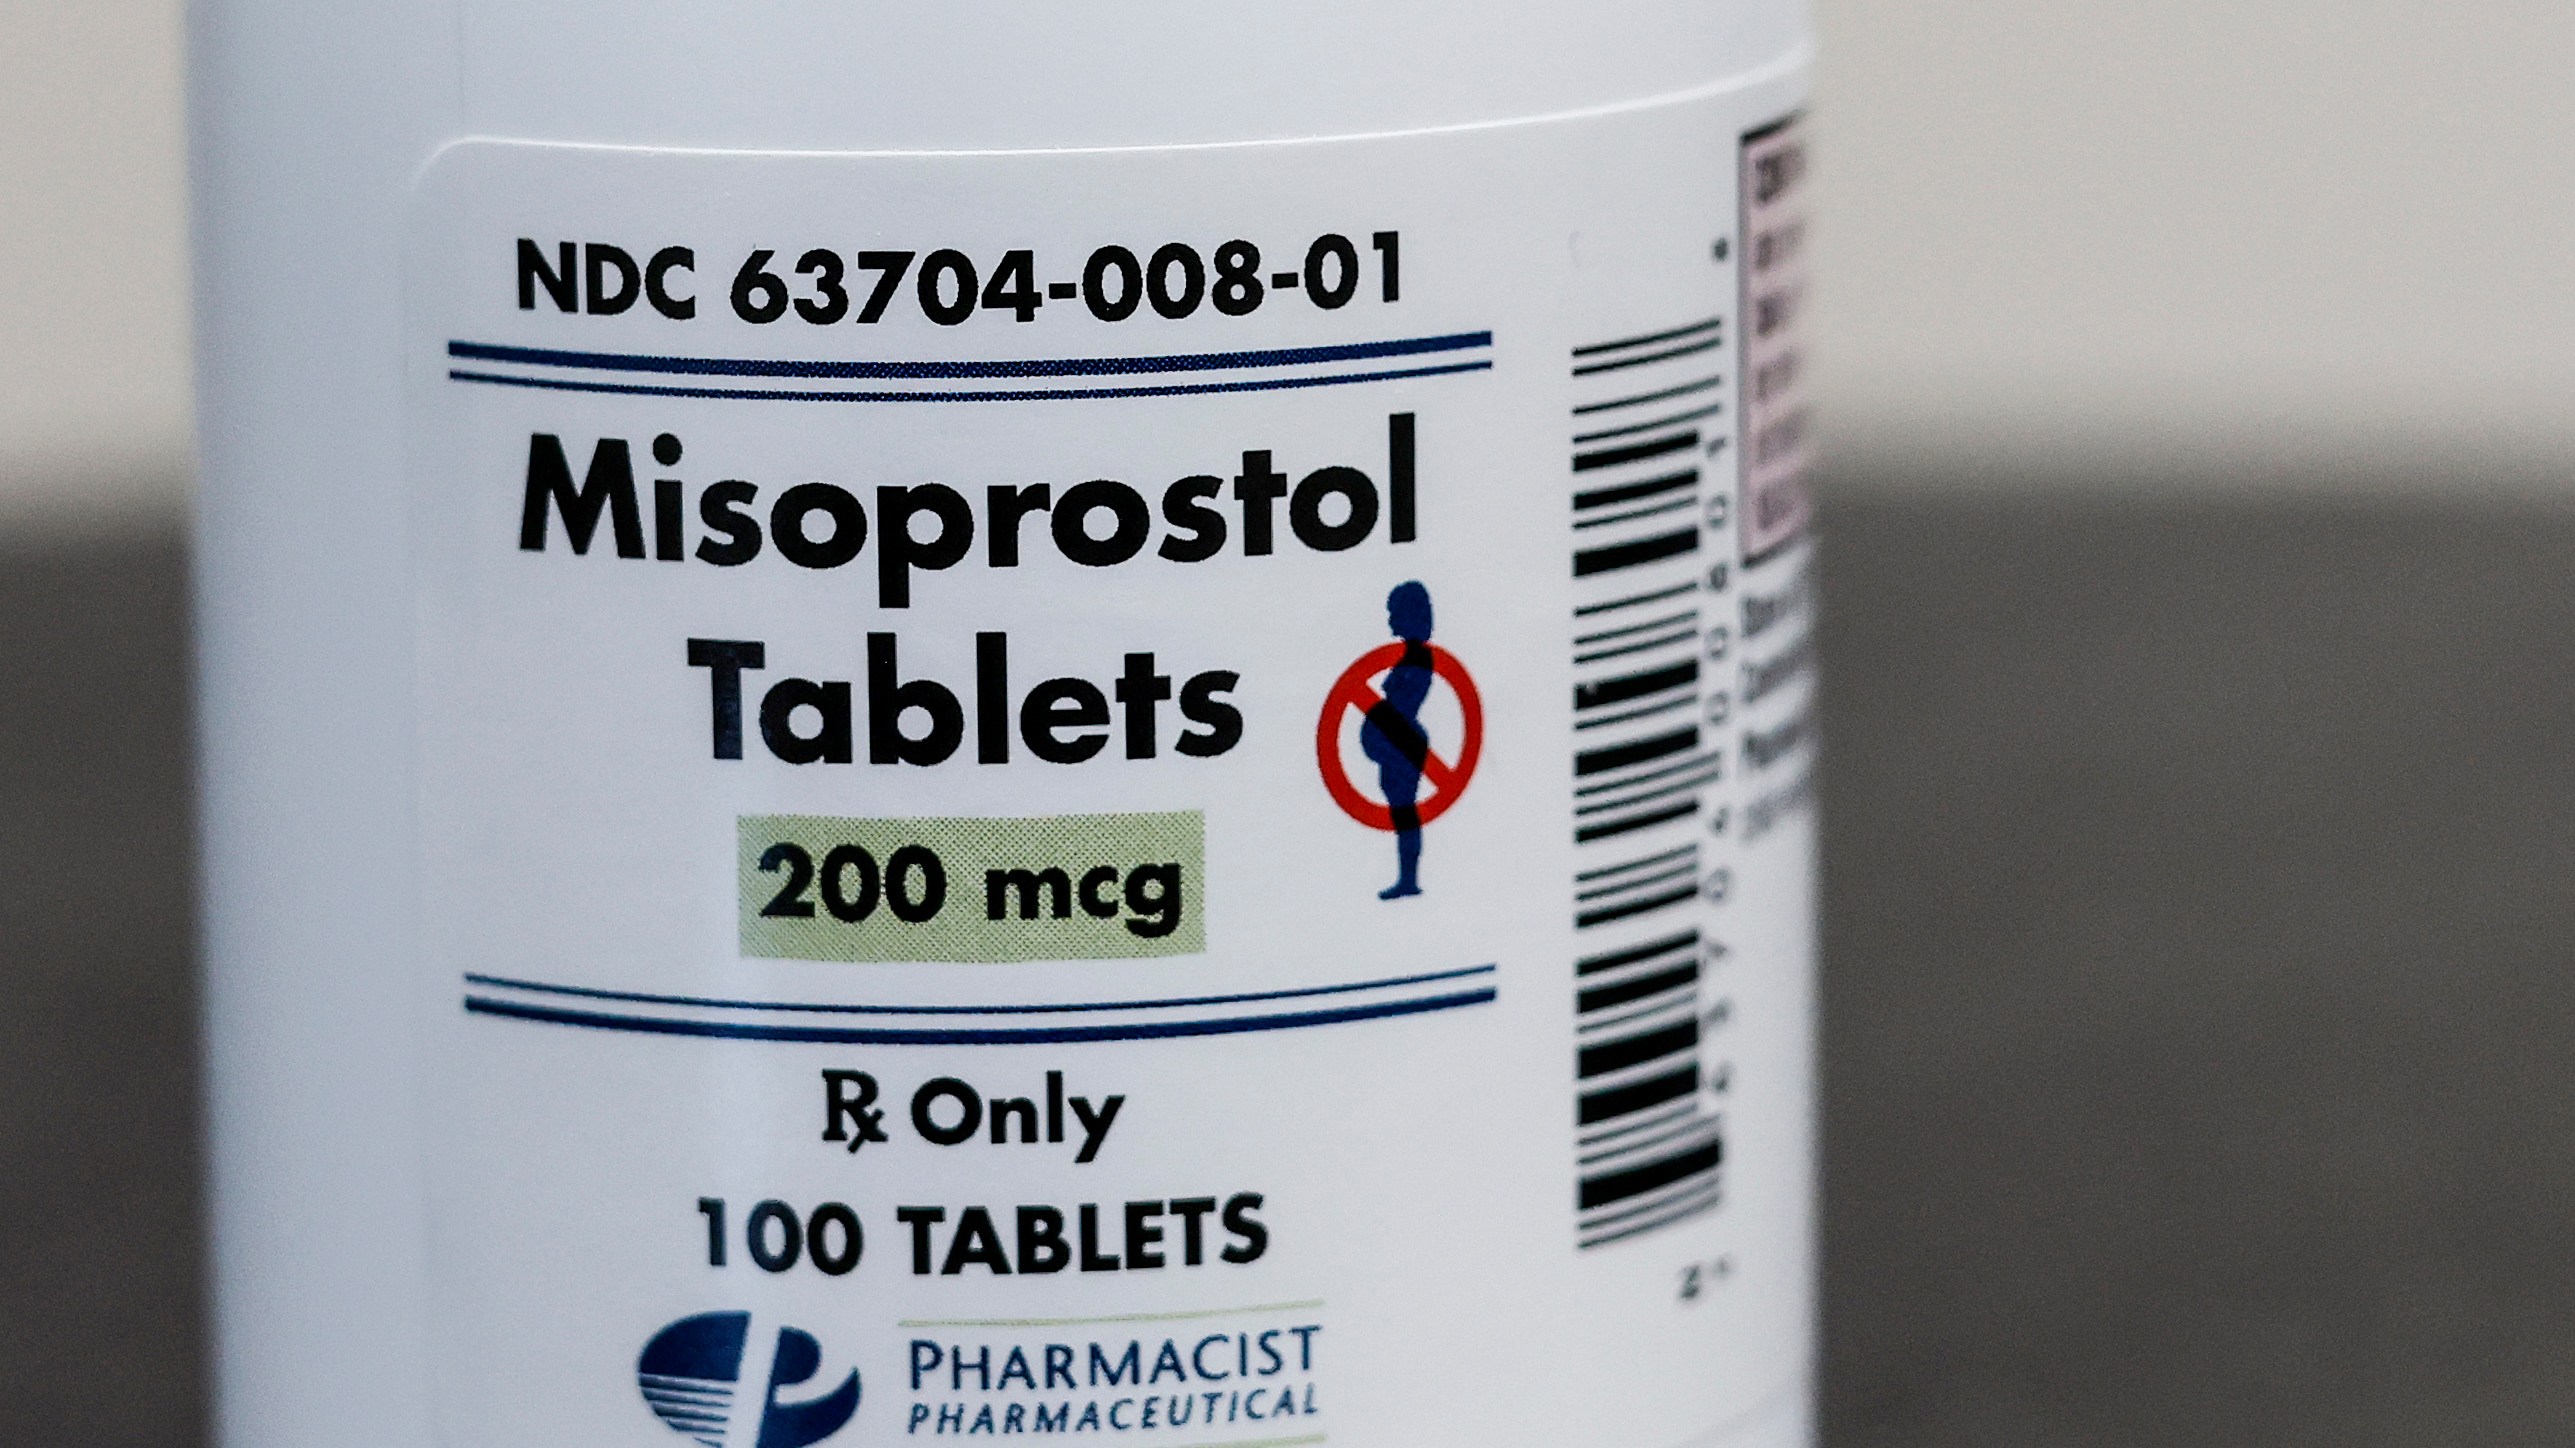 Misoprostol is used in combination with mifepristone to induce abortion and is the most common abortion method used in the United States